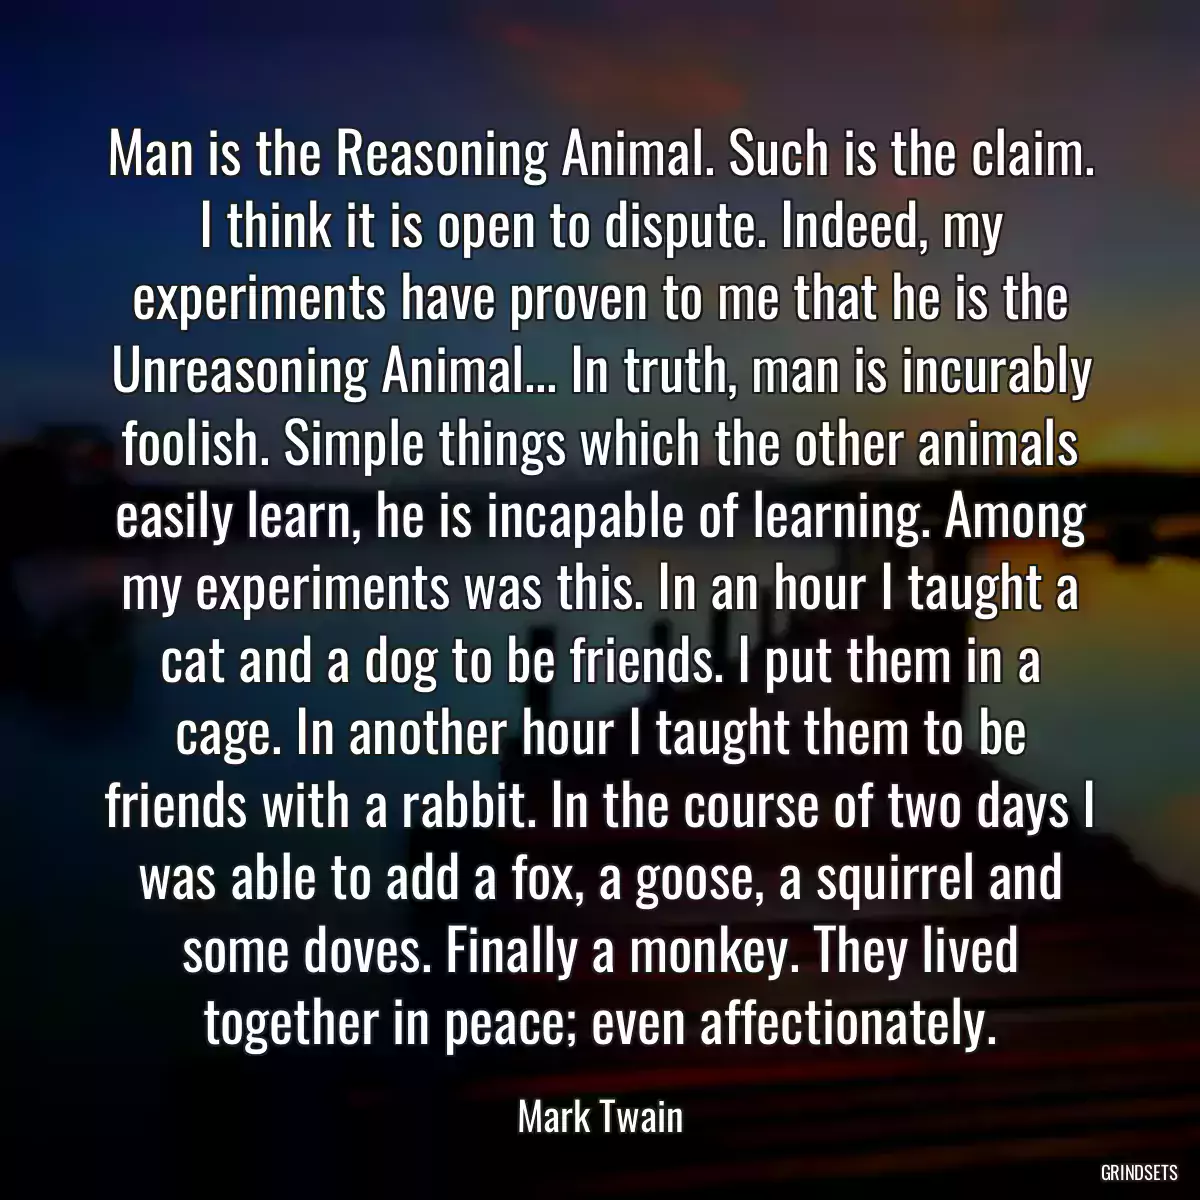 Man is the Reasoning Animal. Such is the claim. I think it is open to dispute. Indeed, my experiments have proven to me that he is the Unreasoning Animal... In truth, man is incurably foolish. Simple things which the other animals easily learn, he is incapable of learning. Among my experiments was this. In an hour I taught a cat and a dog to be friends. I put them in a cage. In another hour I taught them to be friends with a rabbit. In the course of two days I was able to add a fox, a goose, a squirrel and some doves. Finally a monkey. They lived together in peace; even affectionately.